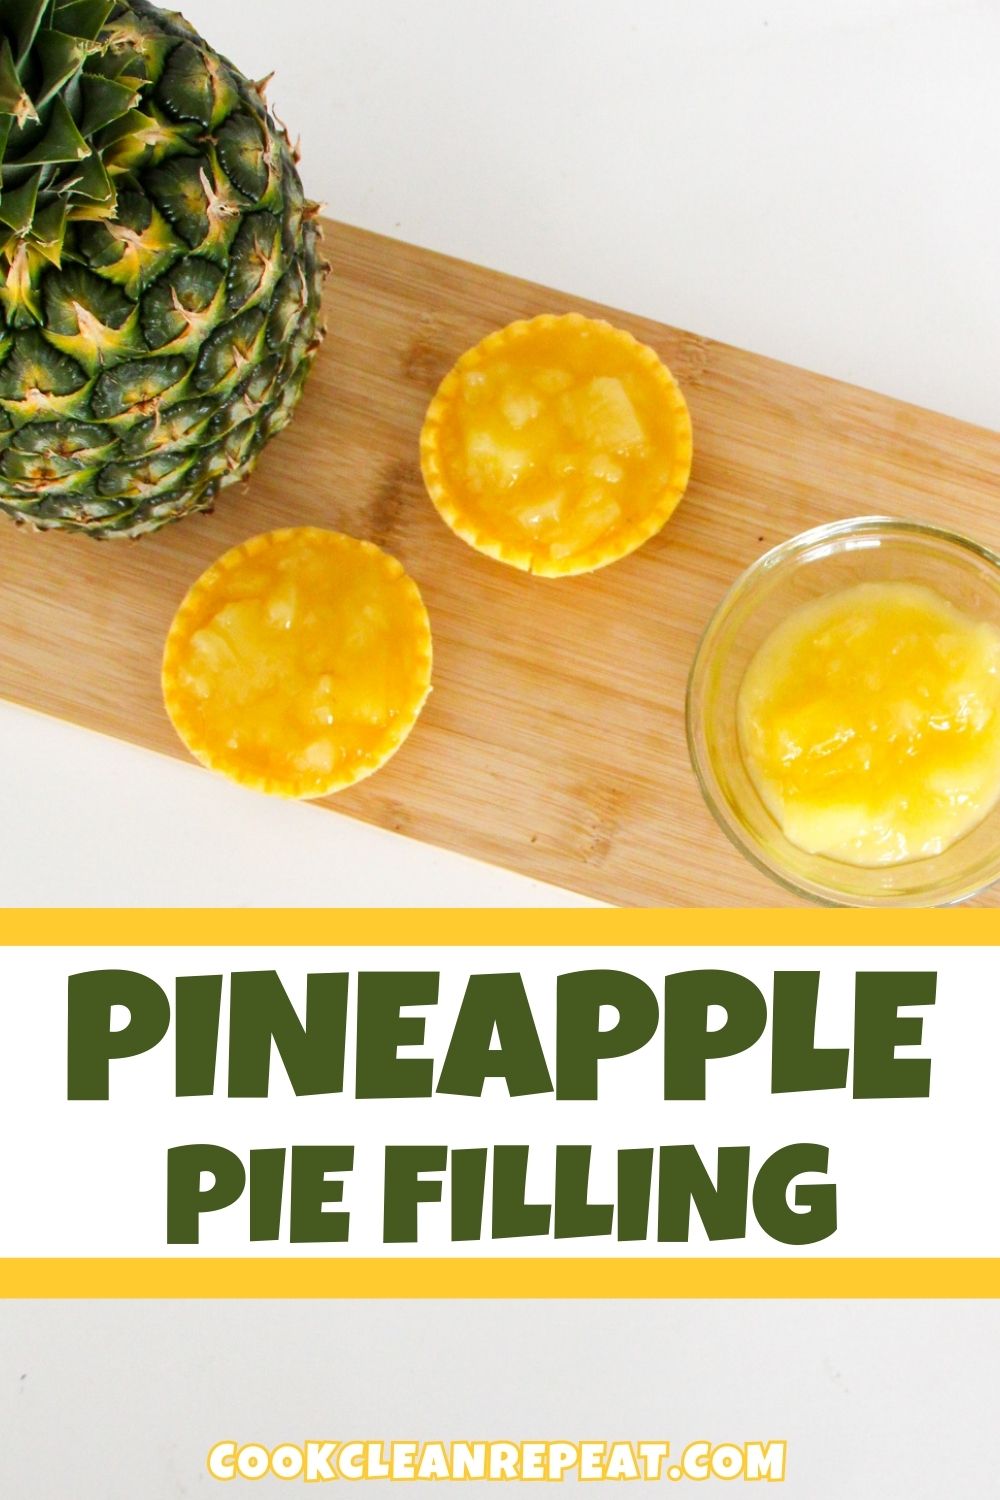 a Pinterest image for a blog post on pineapple pie filling recipe